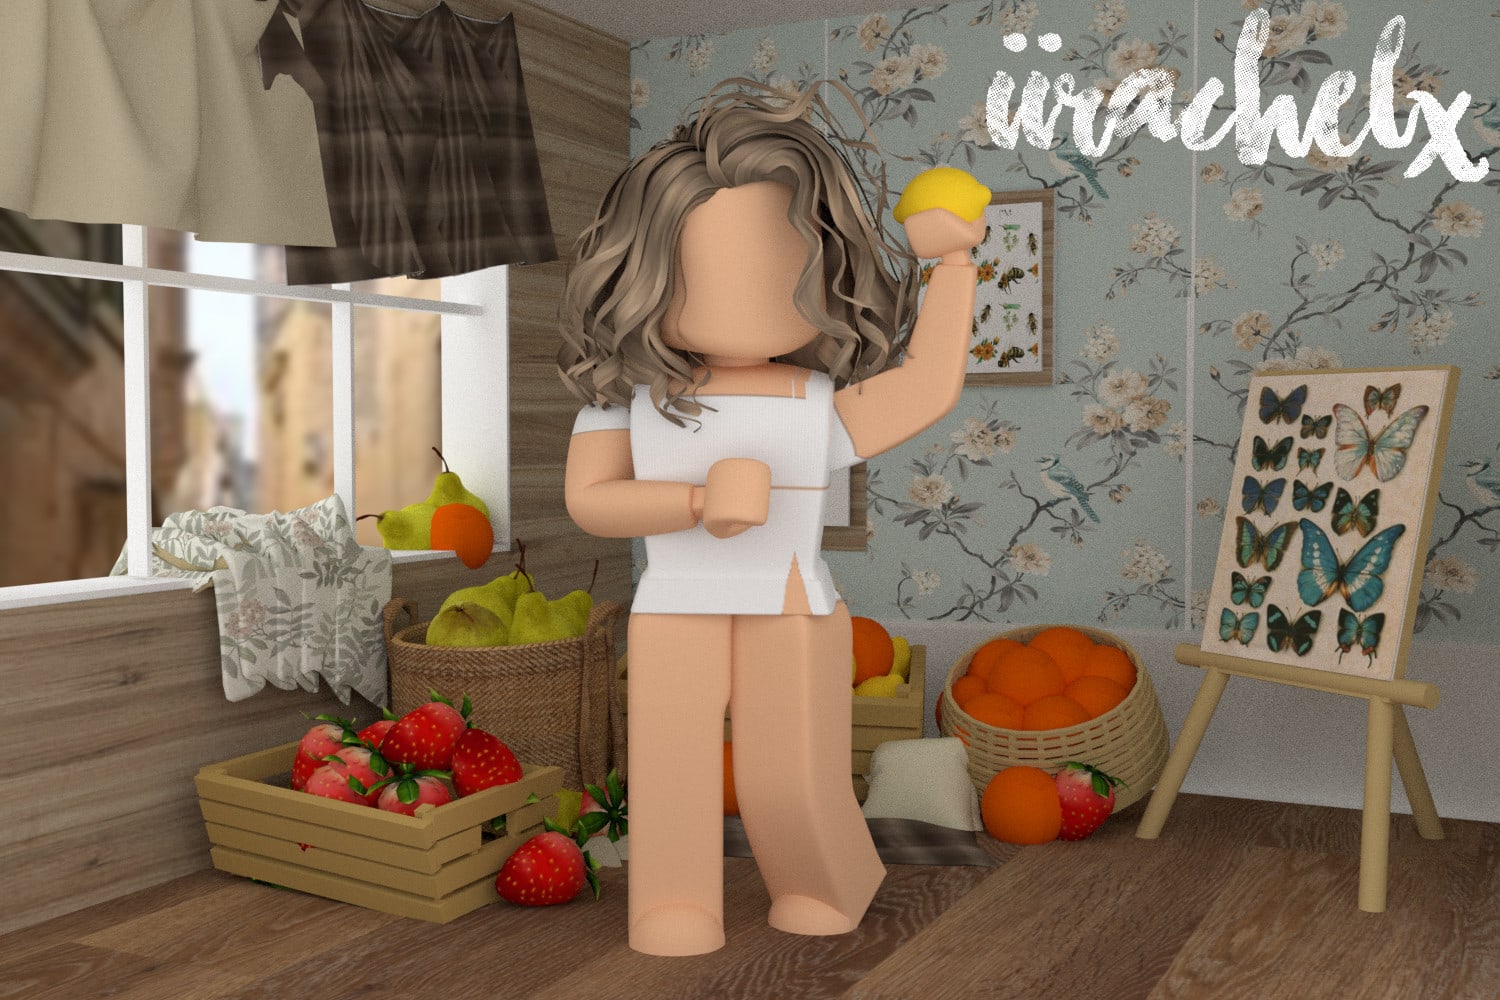 Make A High Quality Detailed Roblox Gfx For You By Iirachelx - transparent gfx peach aesthetic aesthetic cute aesthetic roblox